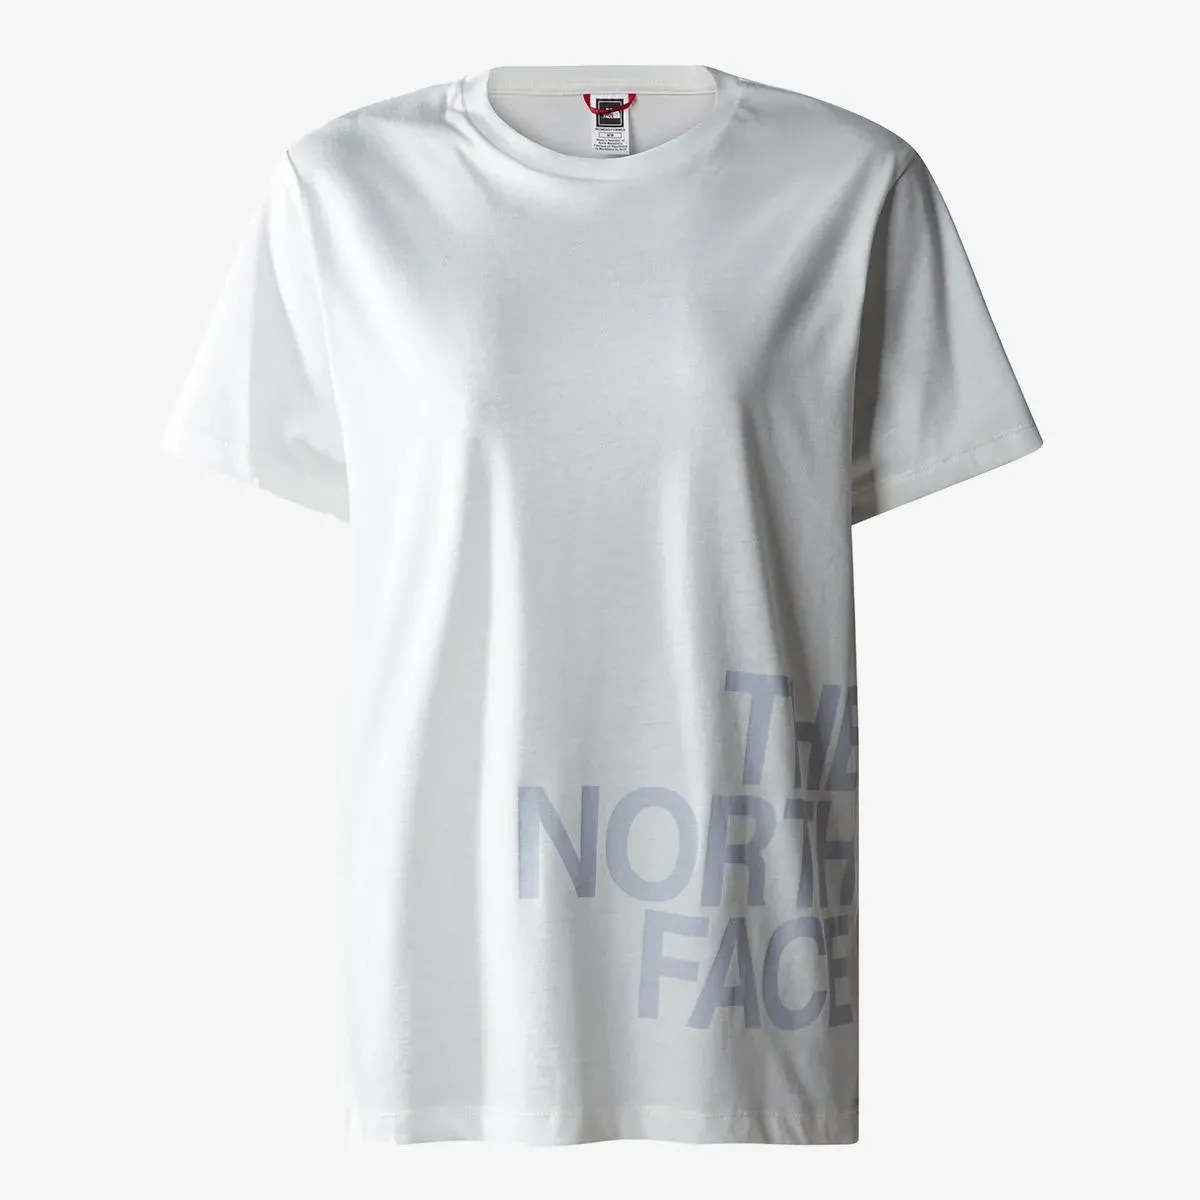 The North Face T-shirt Women’s Blown Up Logo S/S Tee 